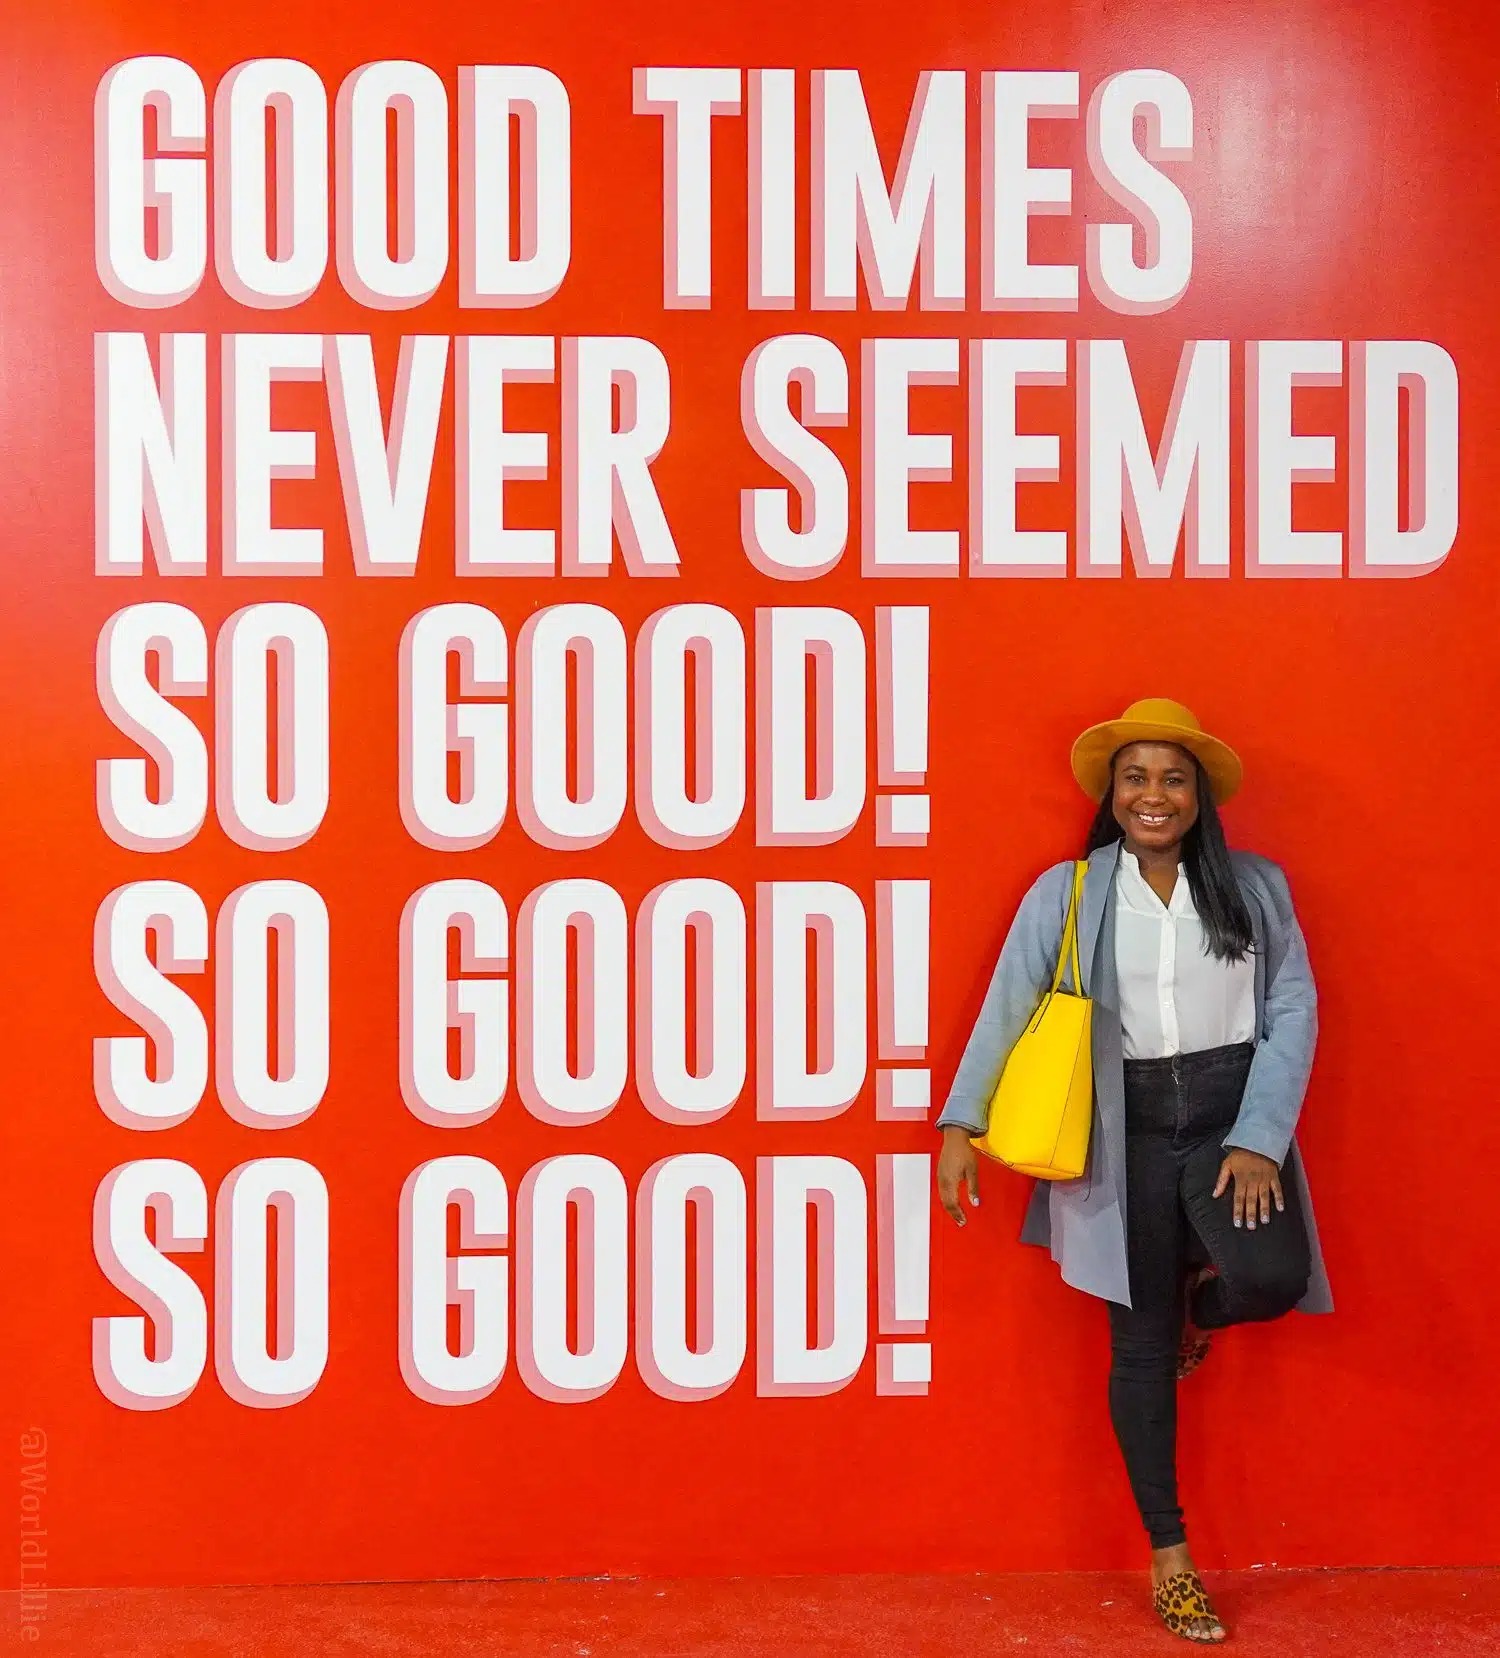 Good times never seemed so good wall sign at Happy Place Boston